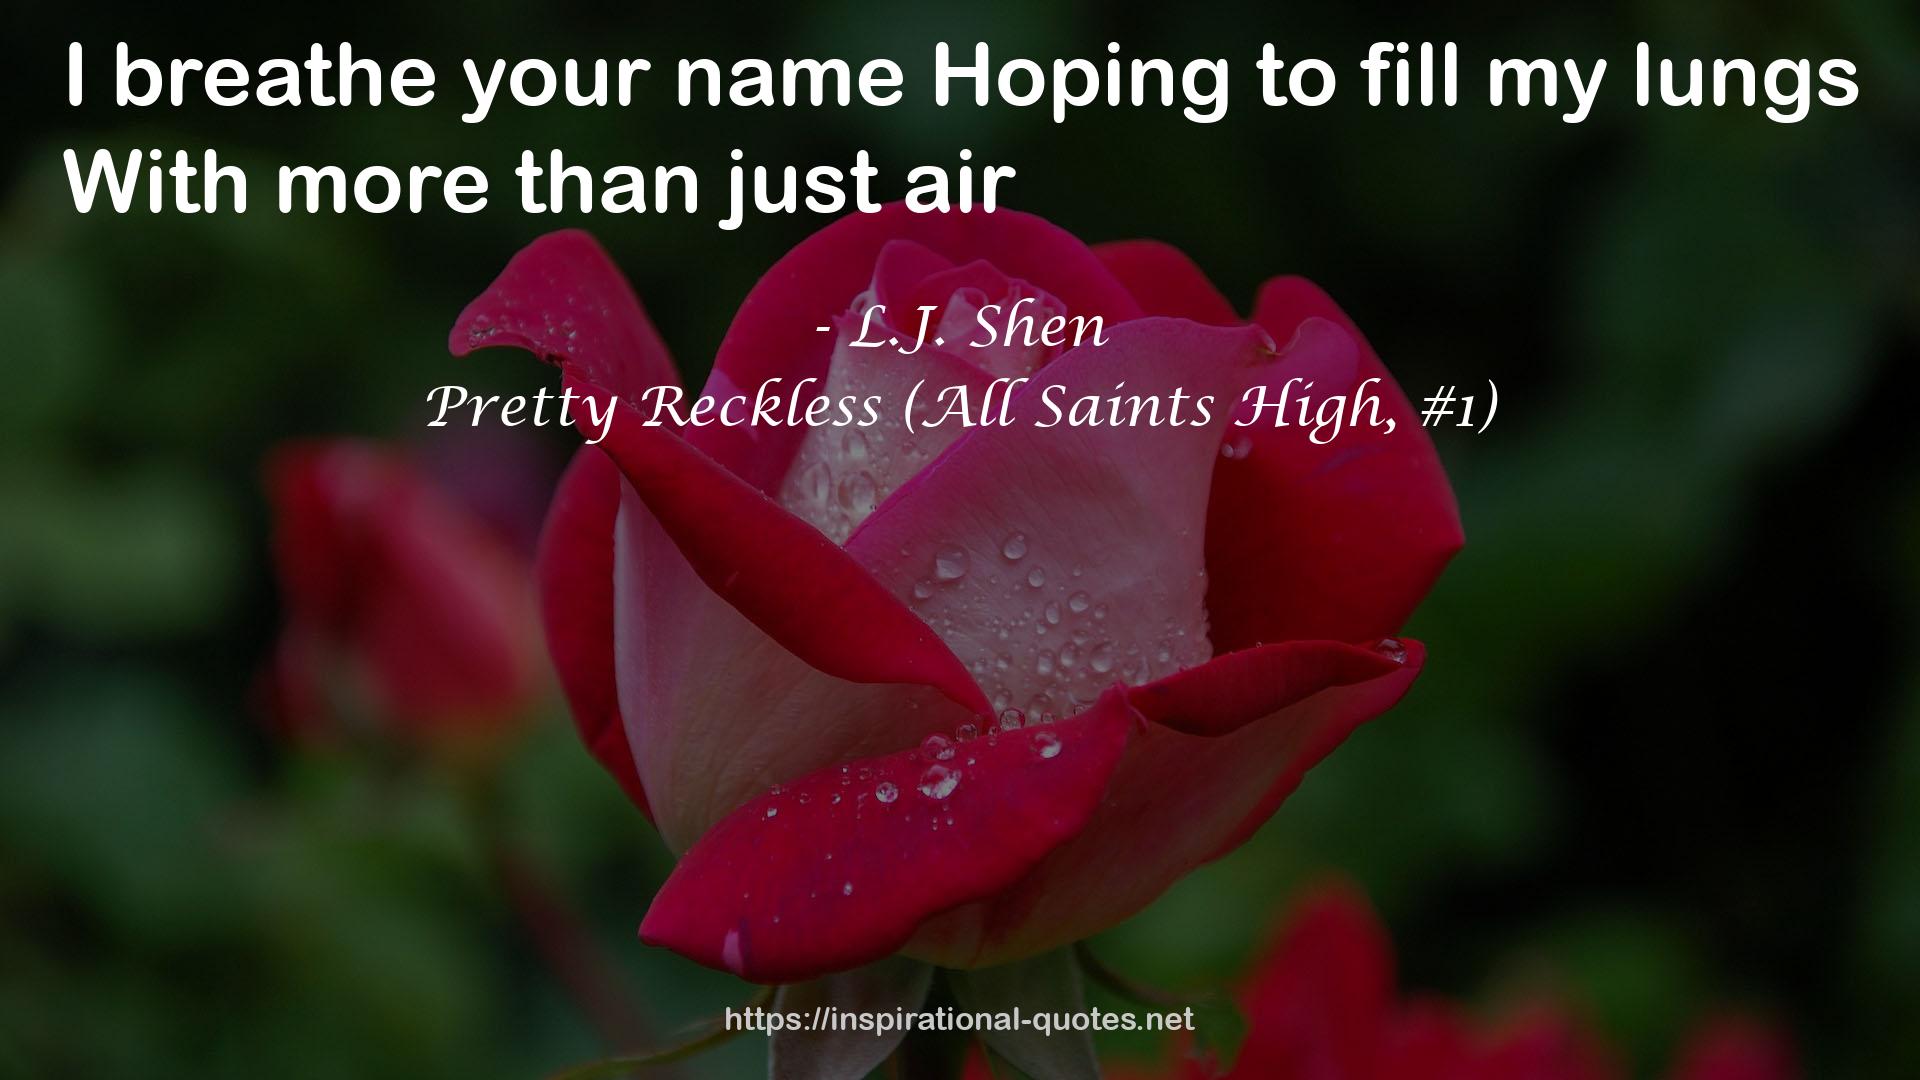 Pretty Reckless (All Saints High, #1) QUOTES